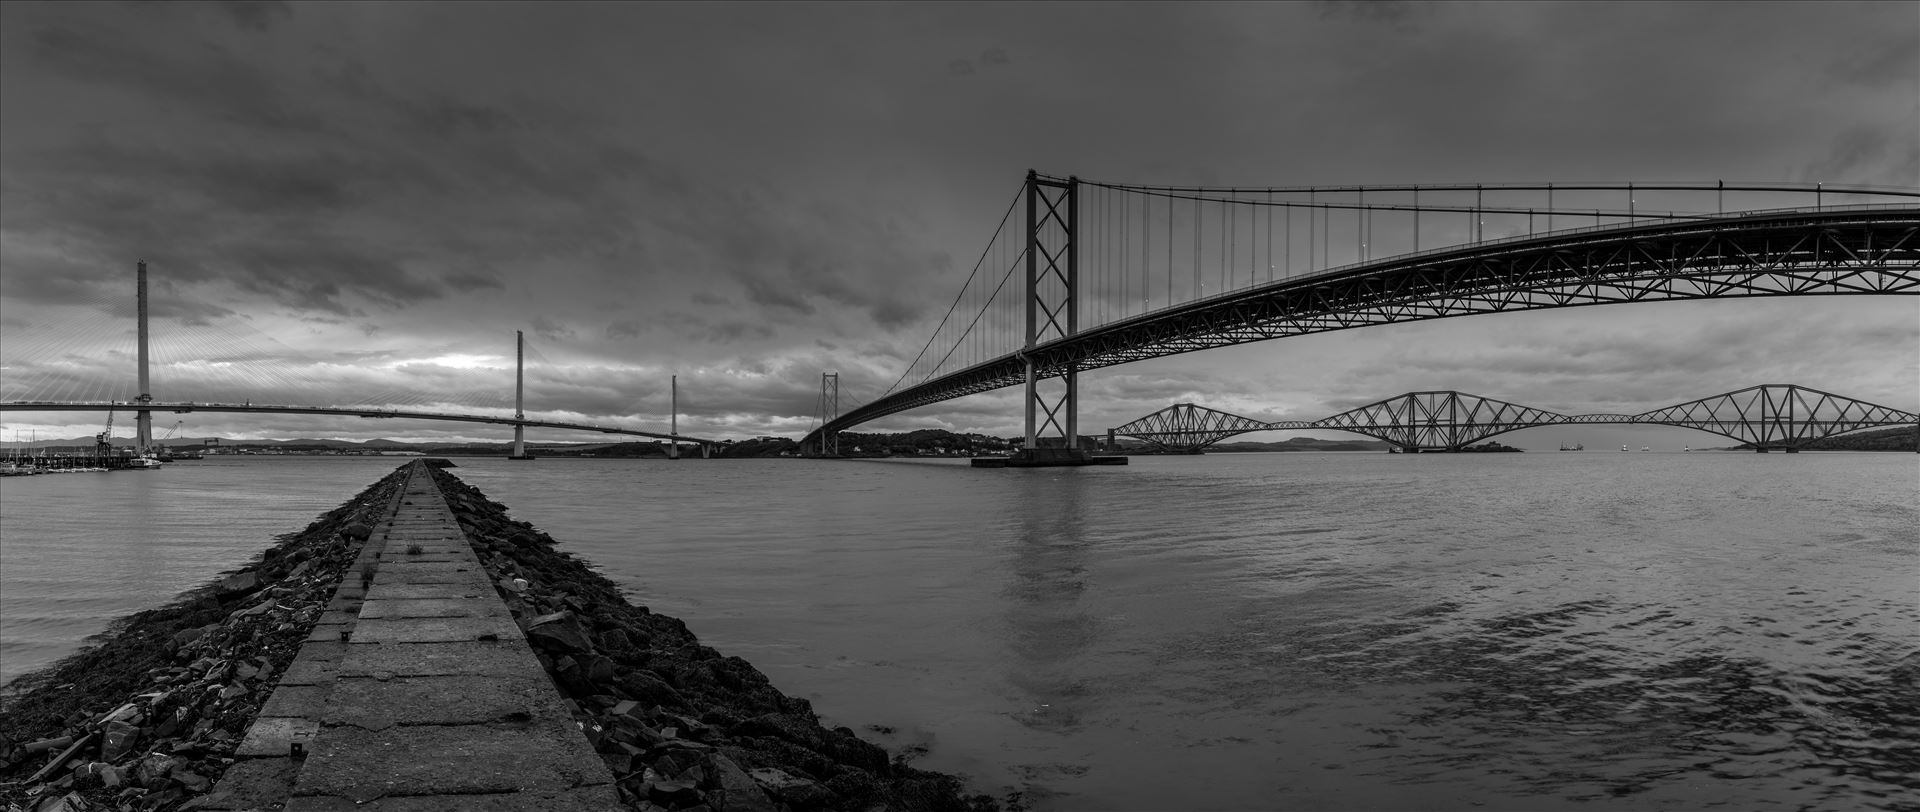 Bridges across the Forth - This panoramic shot shows the 3 bridges spanning the Firth of Forth nr Edinburgh. by philreay